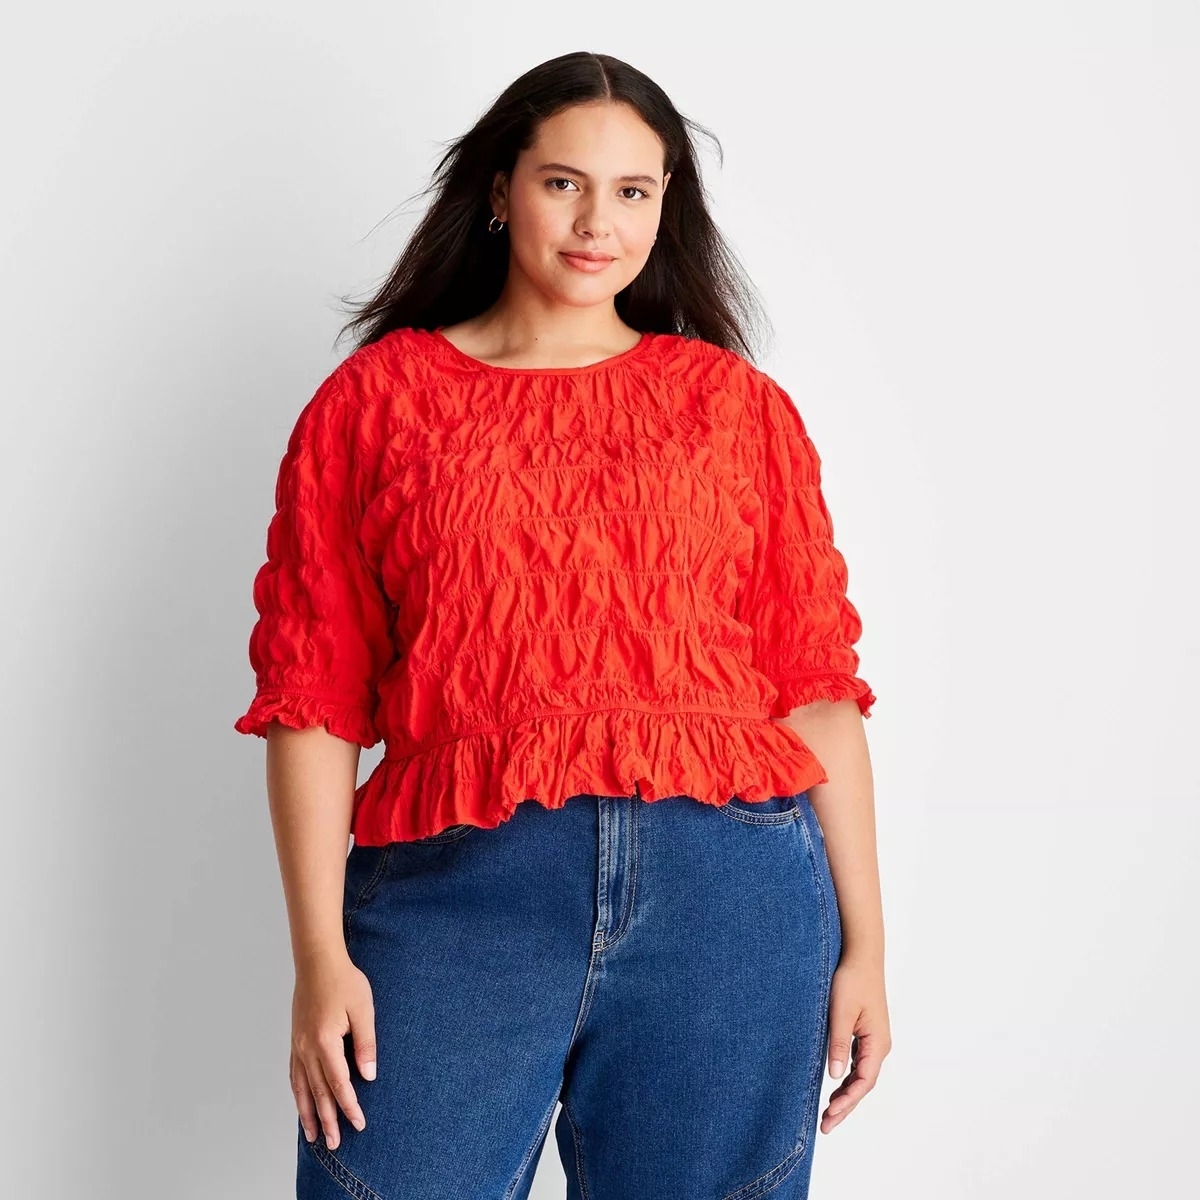 model in a textured red top and blue jeans posing for a shopping article